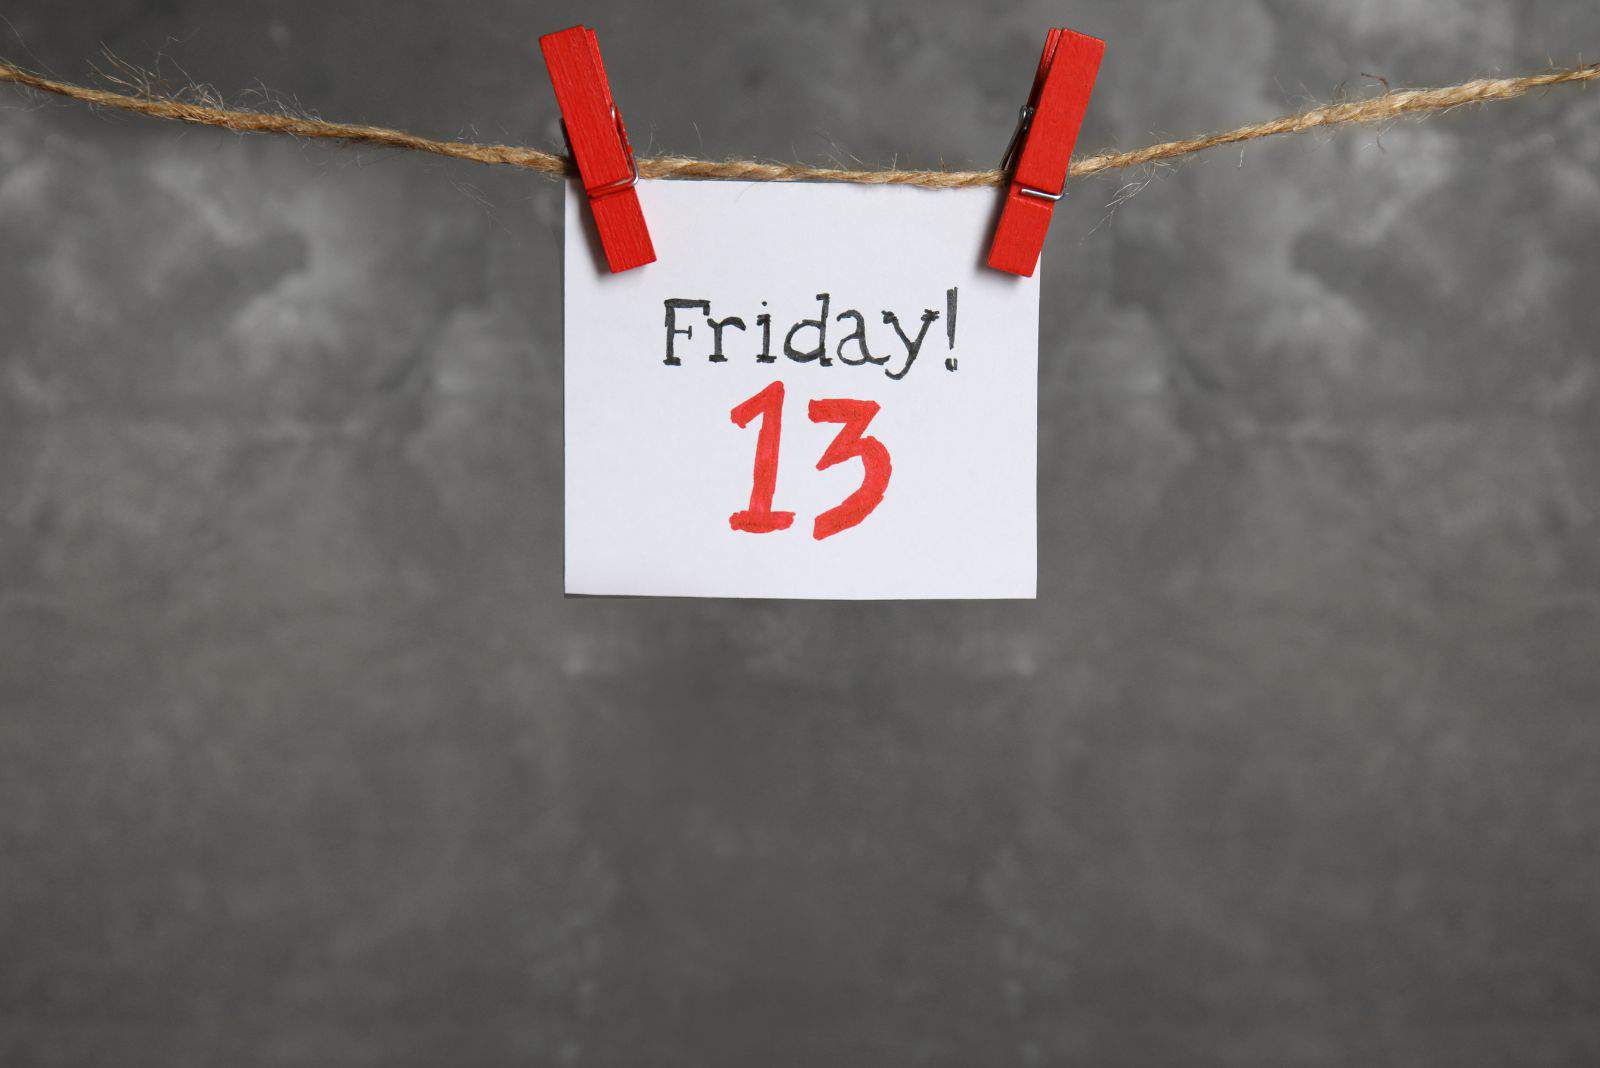 friday 13th sign hanging